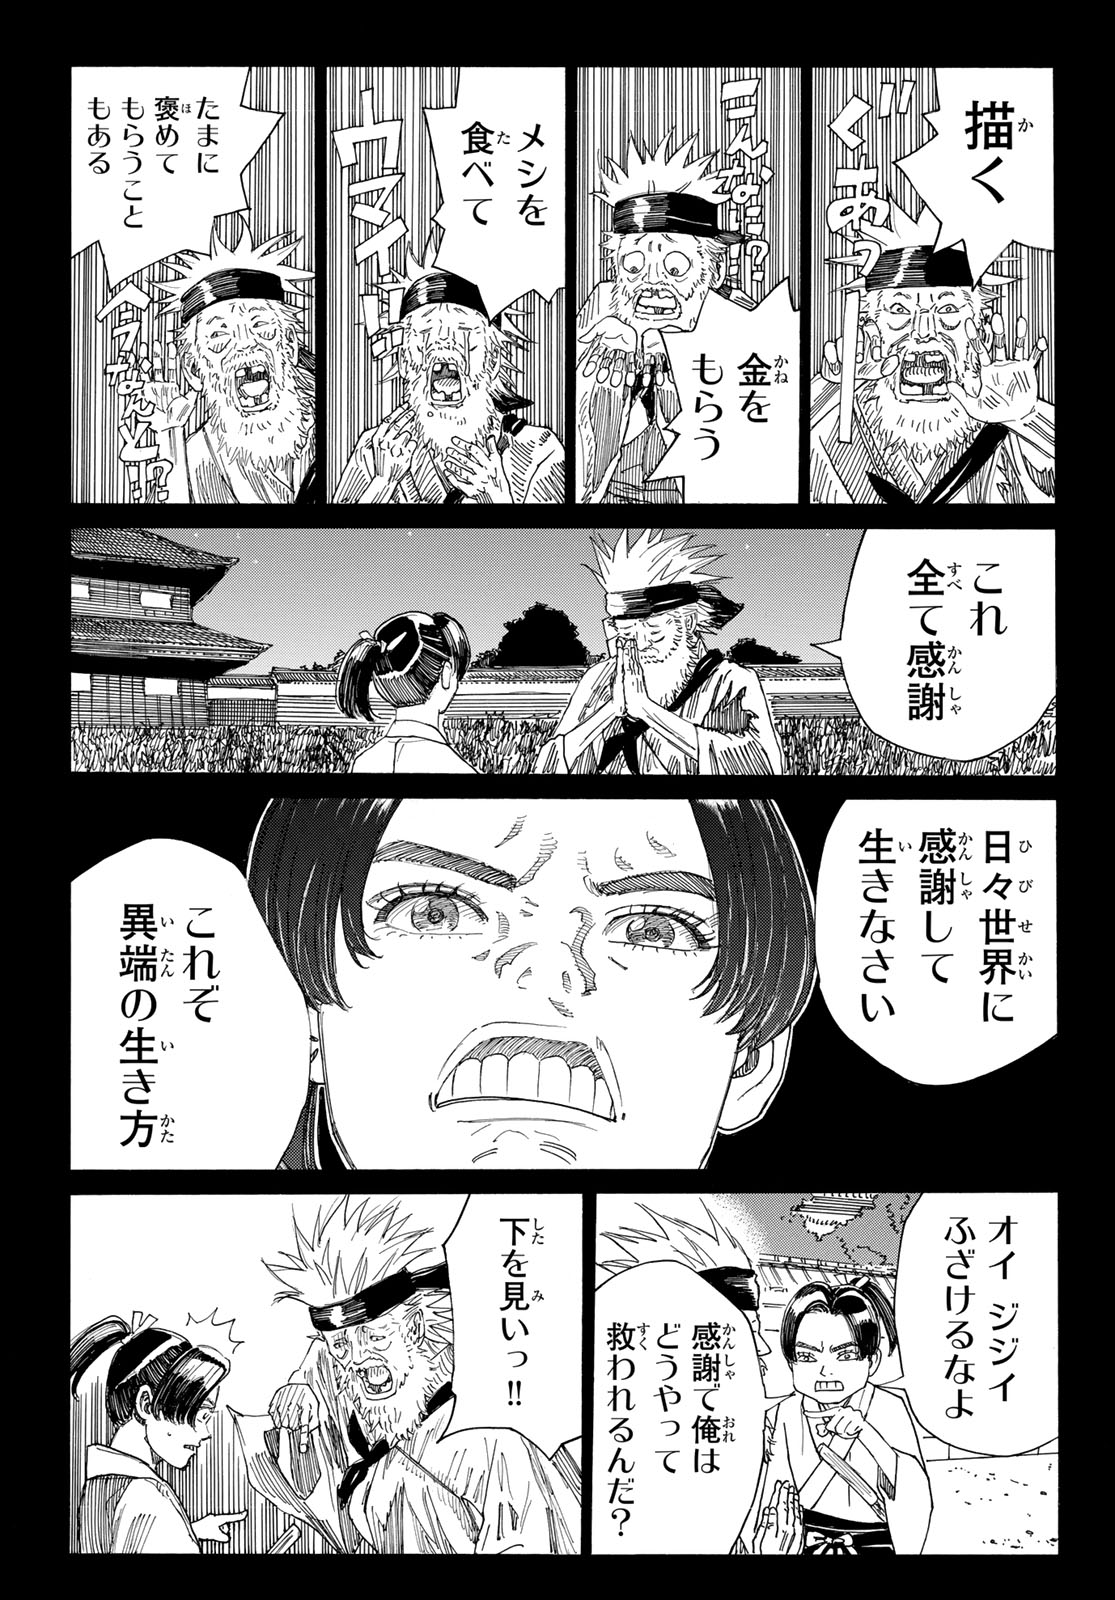 An Mo Miburo 第132話 - Page 15